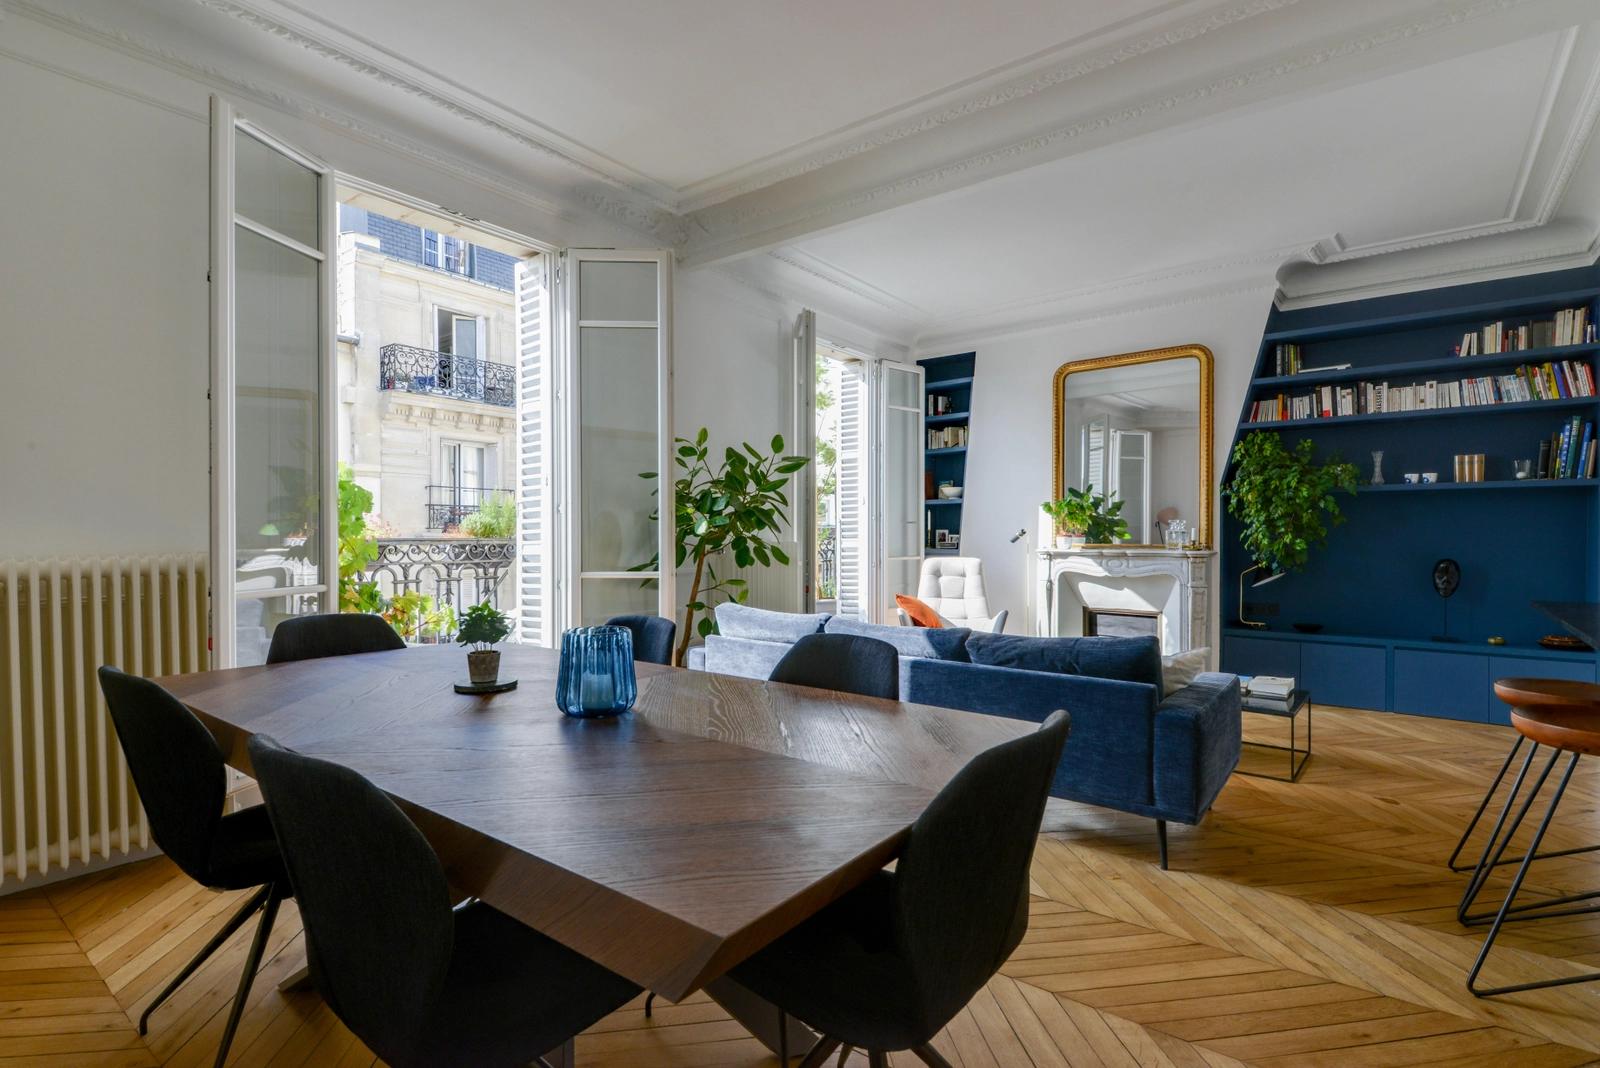 Meeting room in Beautiful Haussmann-style apartment - 3